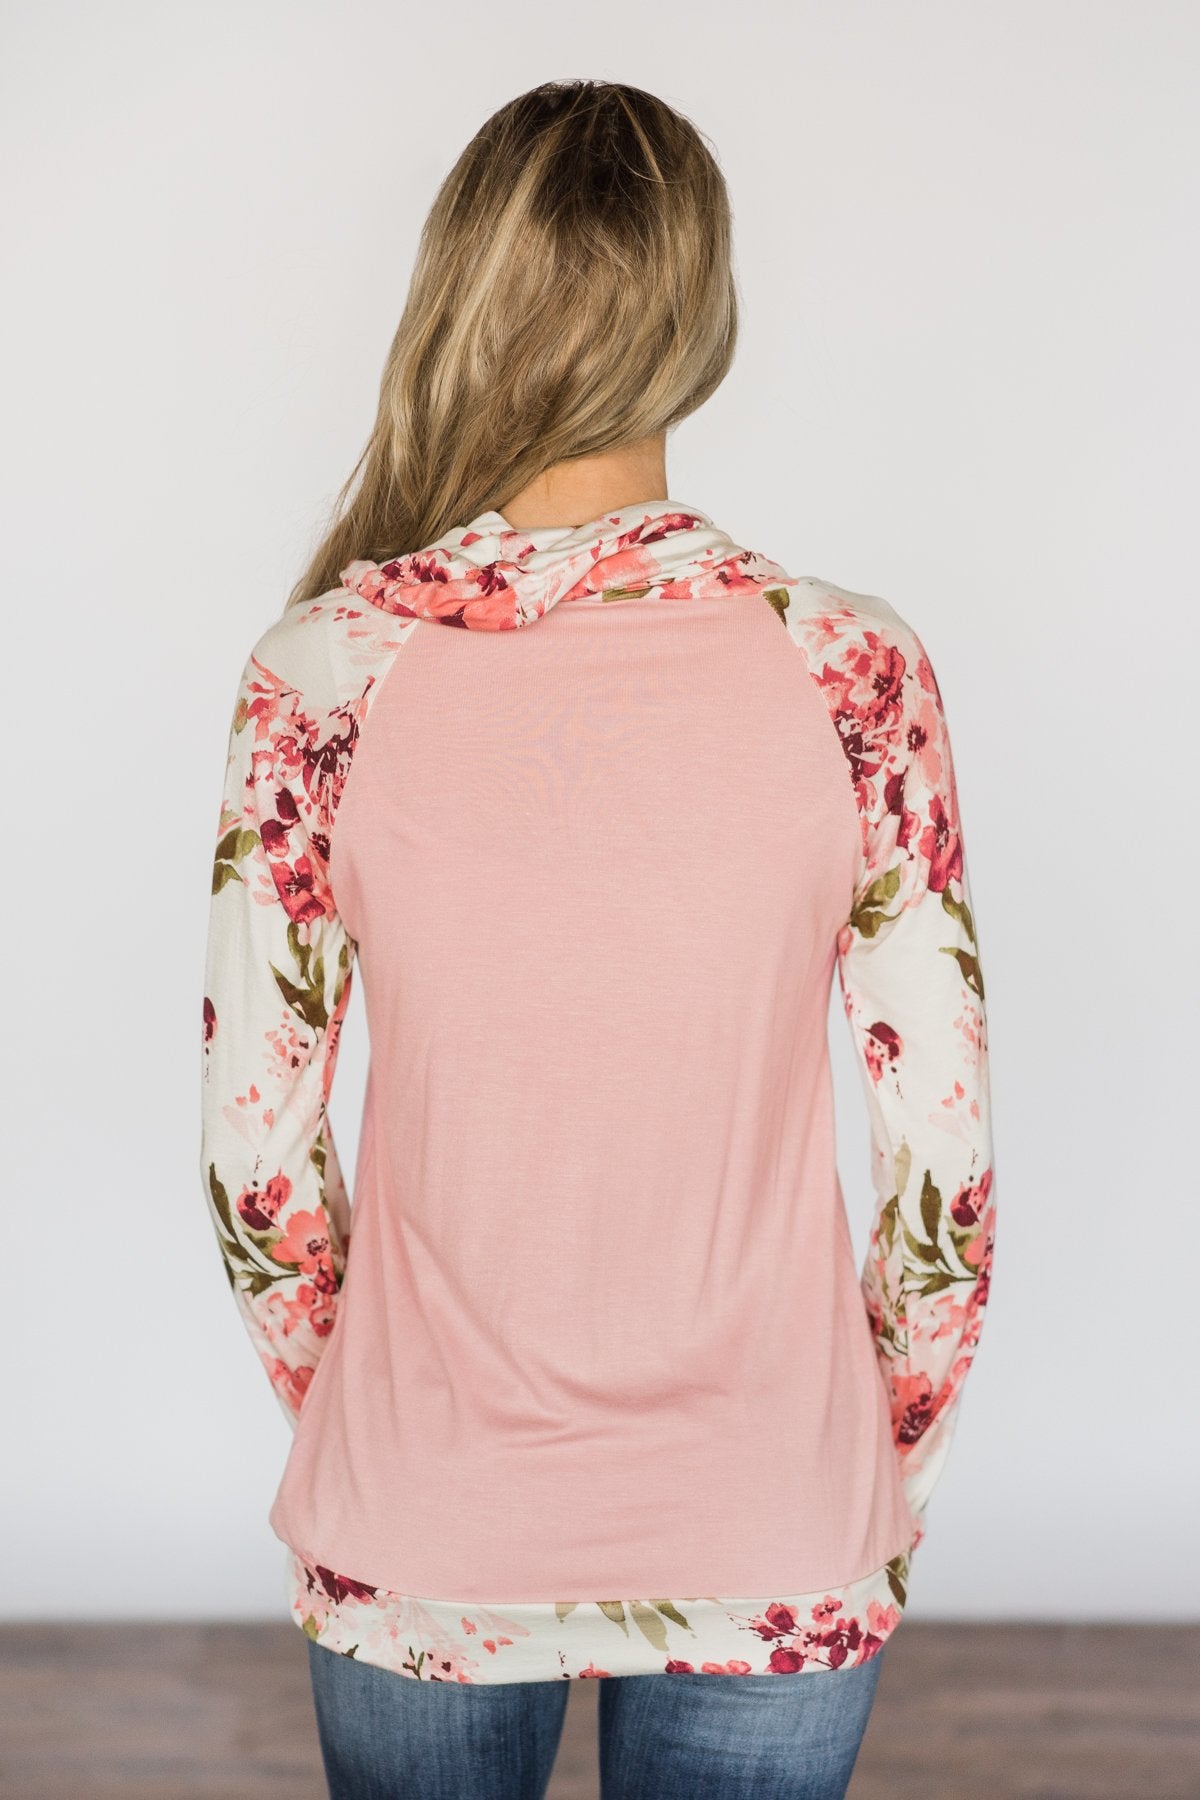 One Sweet Day Floral Cowl Neck Top